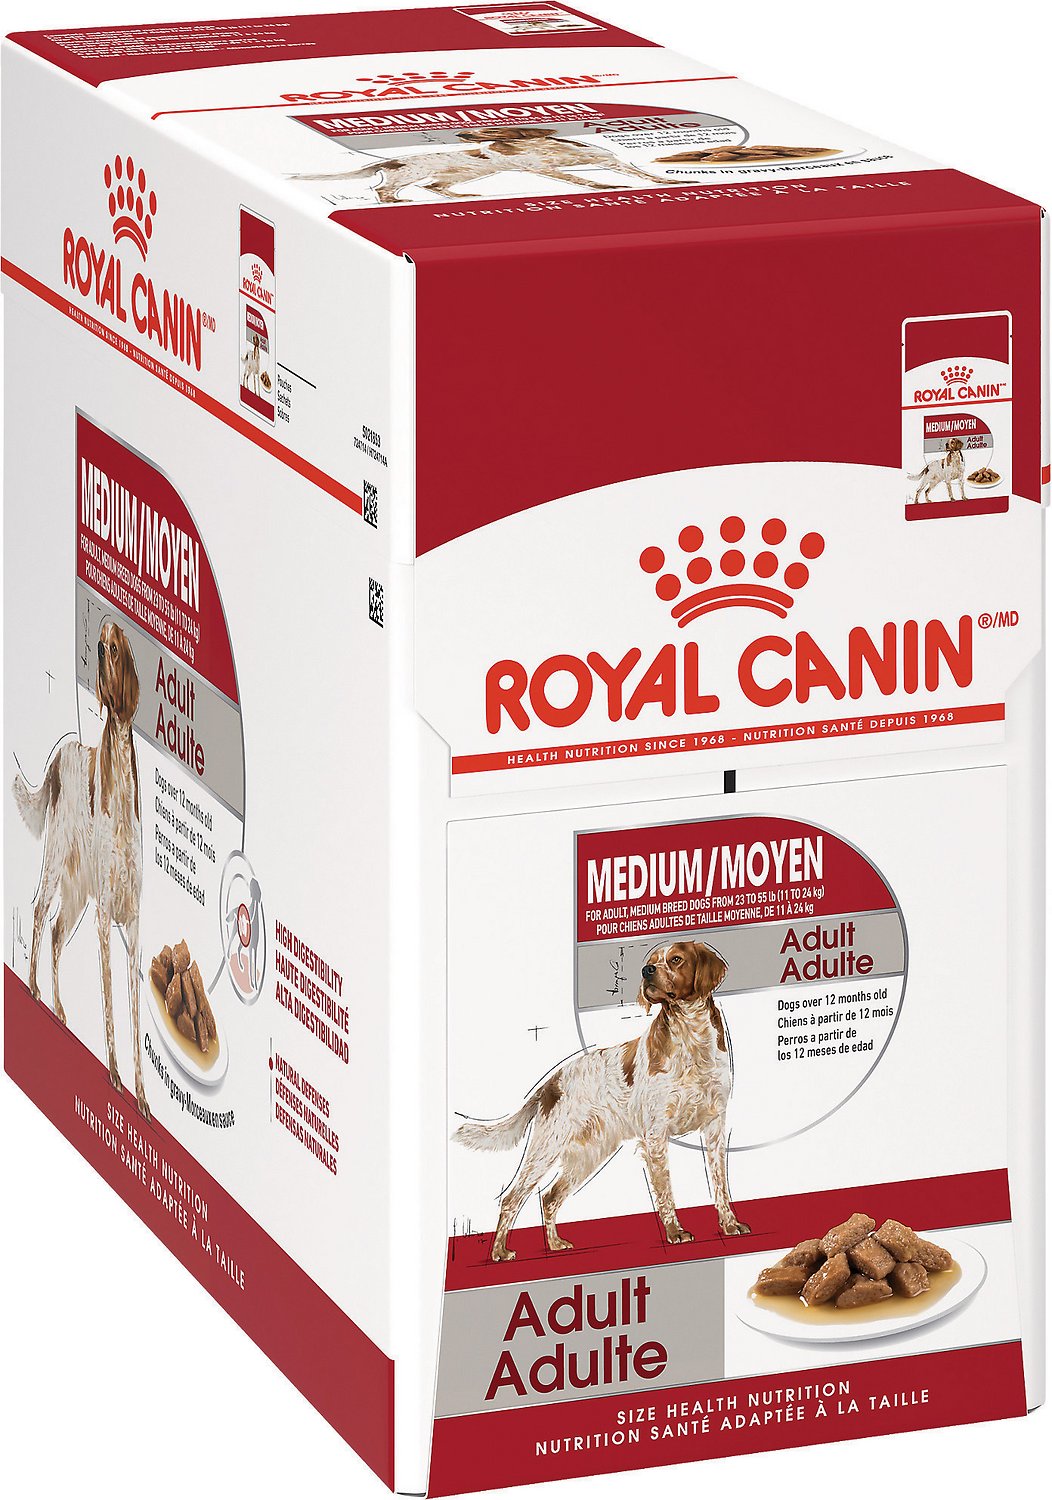 Royal canin Medium Adult -10 pack pouches (10x140g)